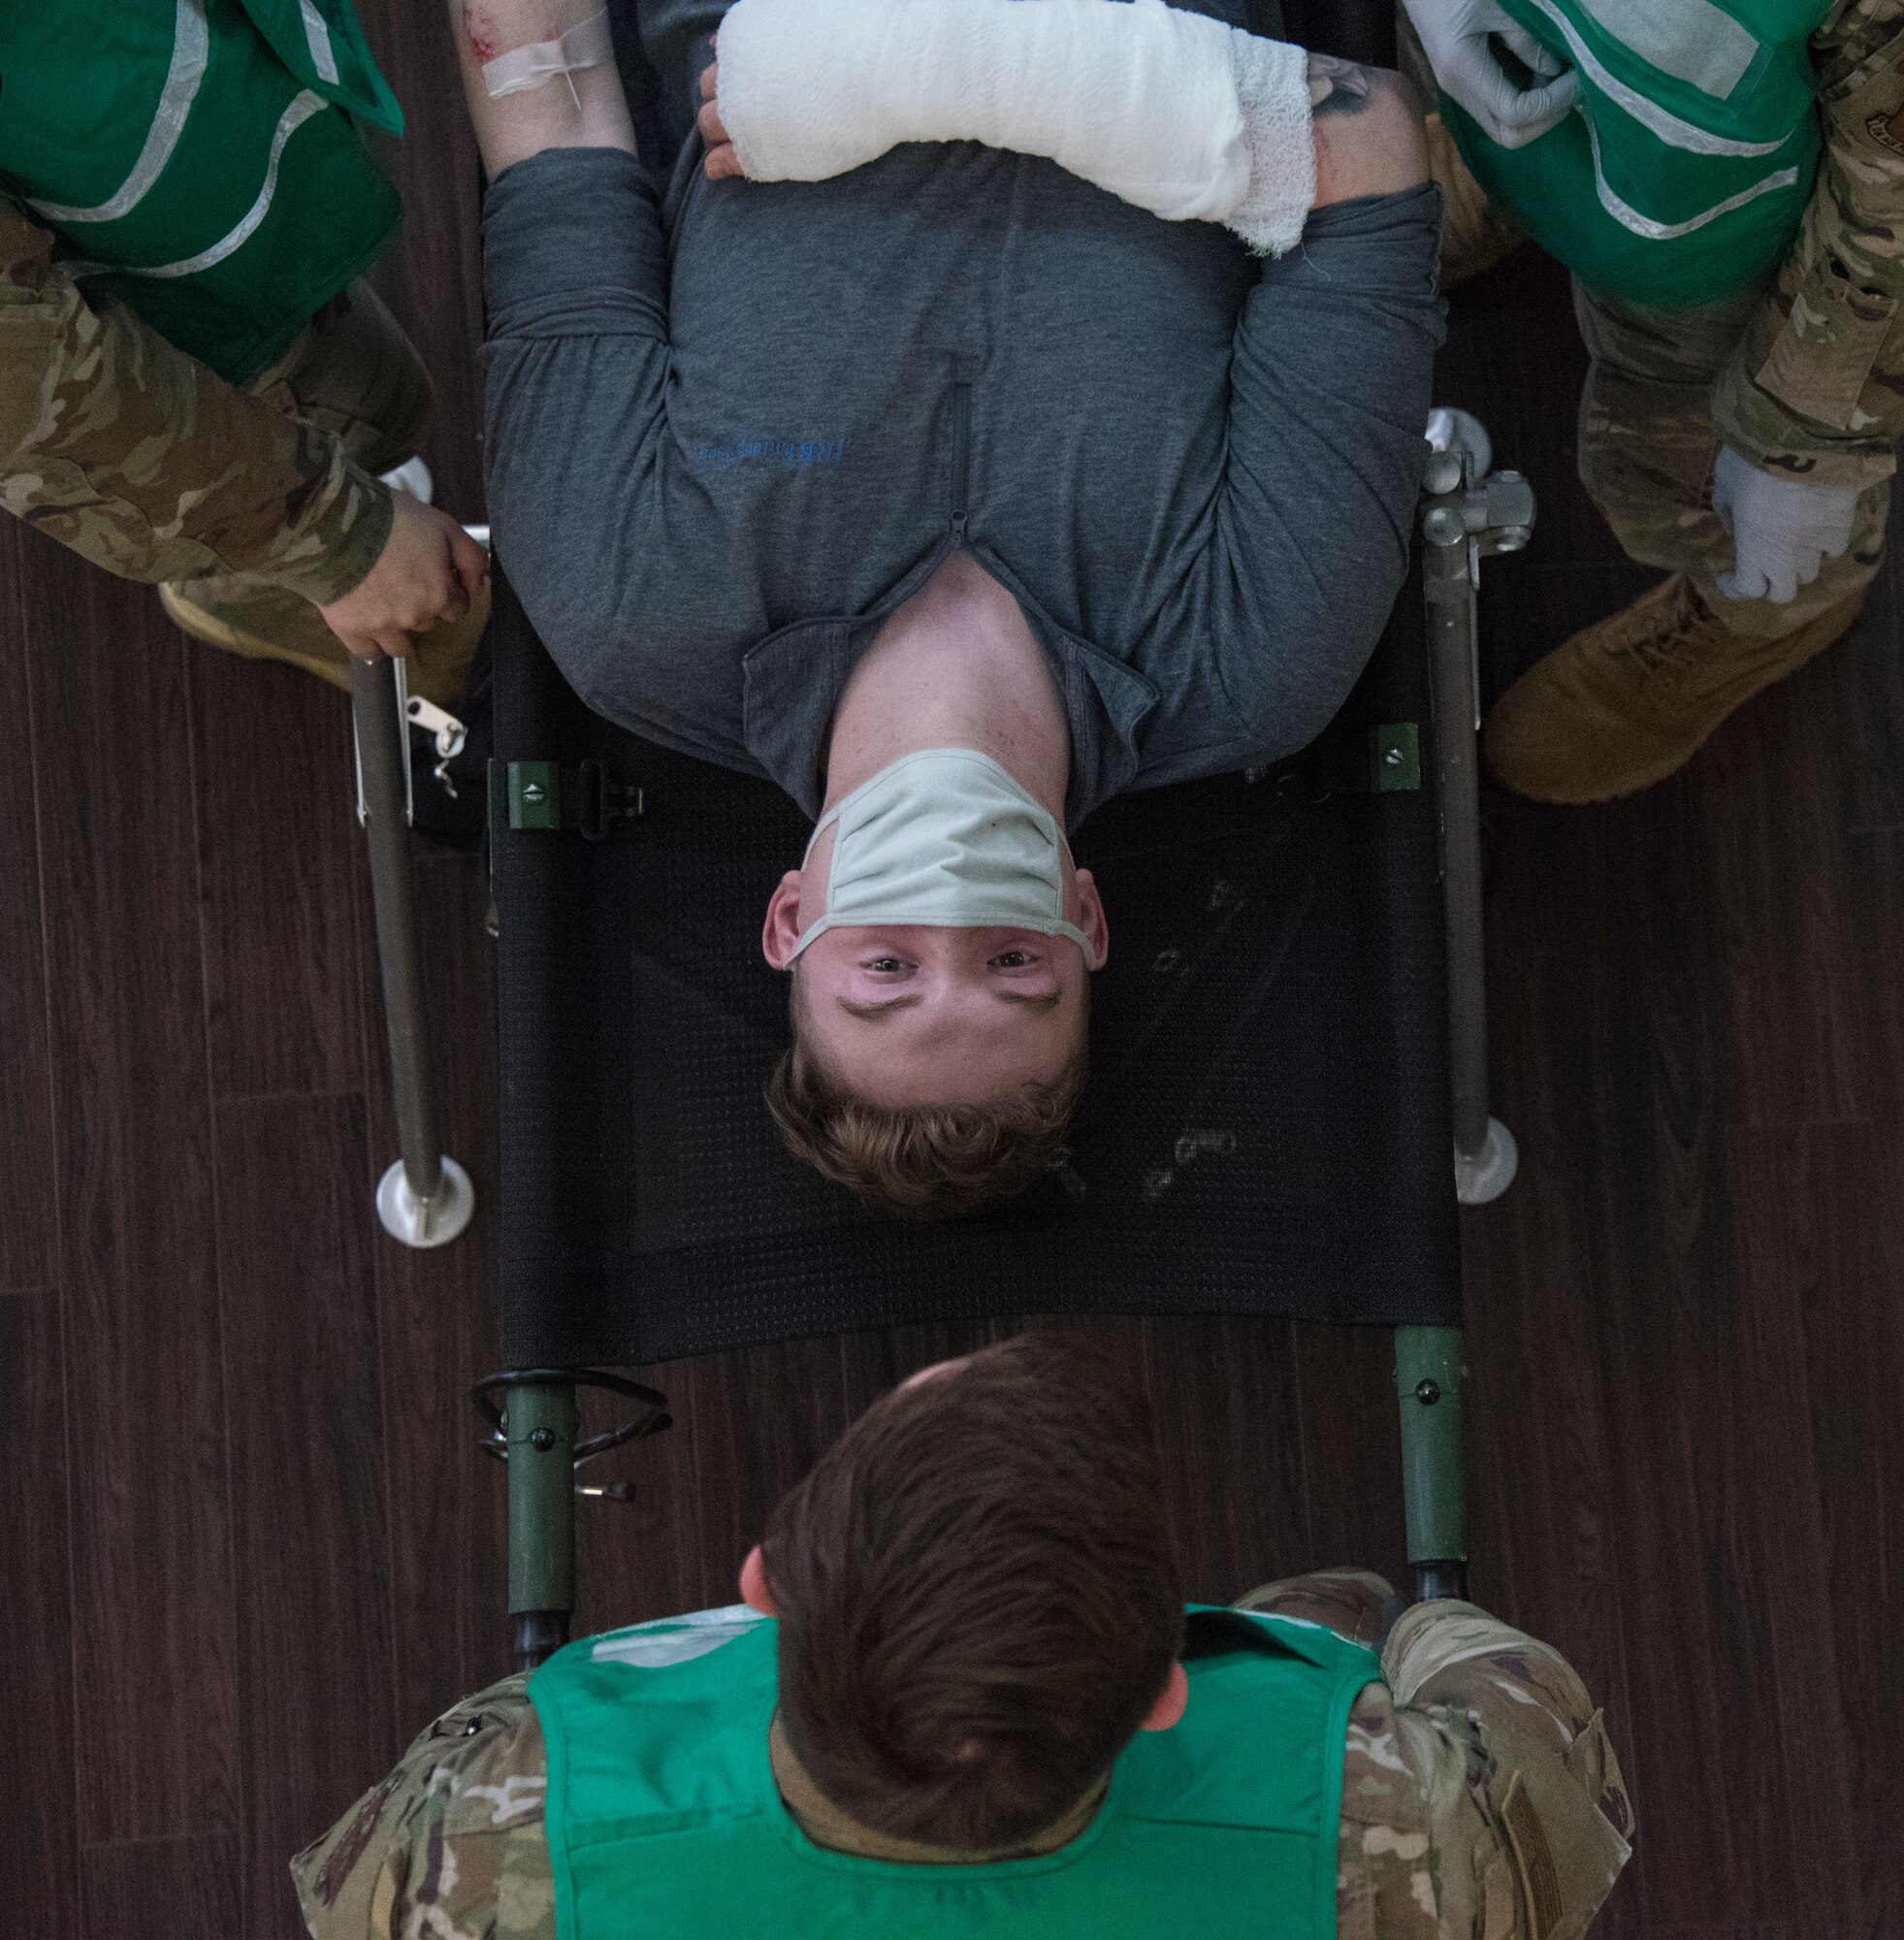 A mock patient receives care during a base readiness exercise at Spangdahlem Air Base, Germany, Nov. 17, 2020. This particular exercise inject allowed for medical personnel to train by responding to patients who may have come in contact with possible airborne contamination. (U.S. Air Force photo by Senior Airman Chance D. Nardone)